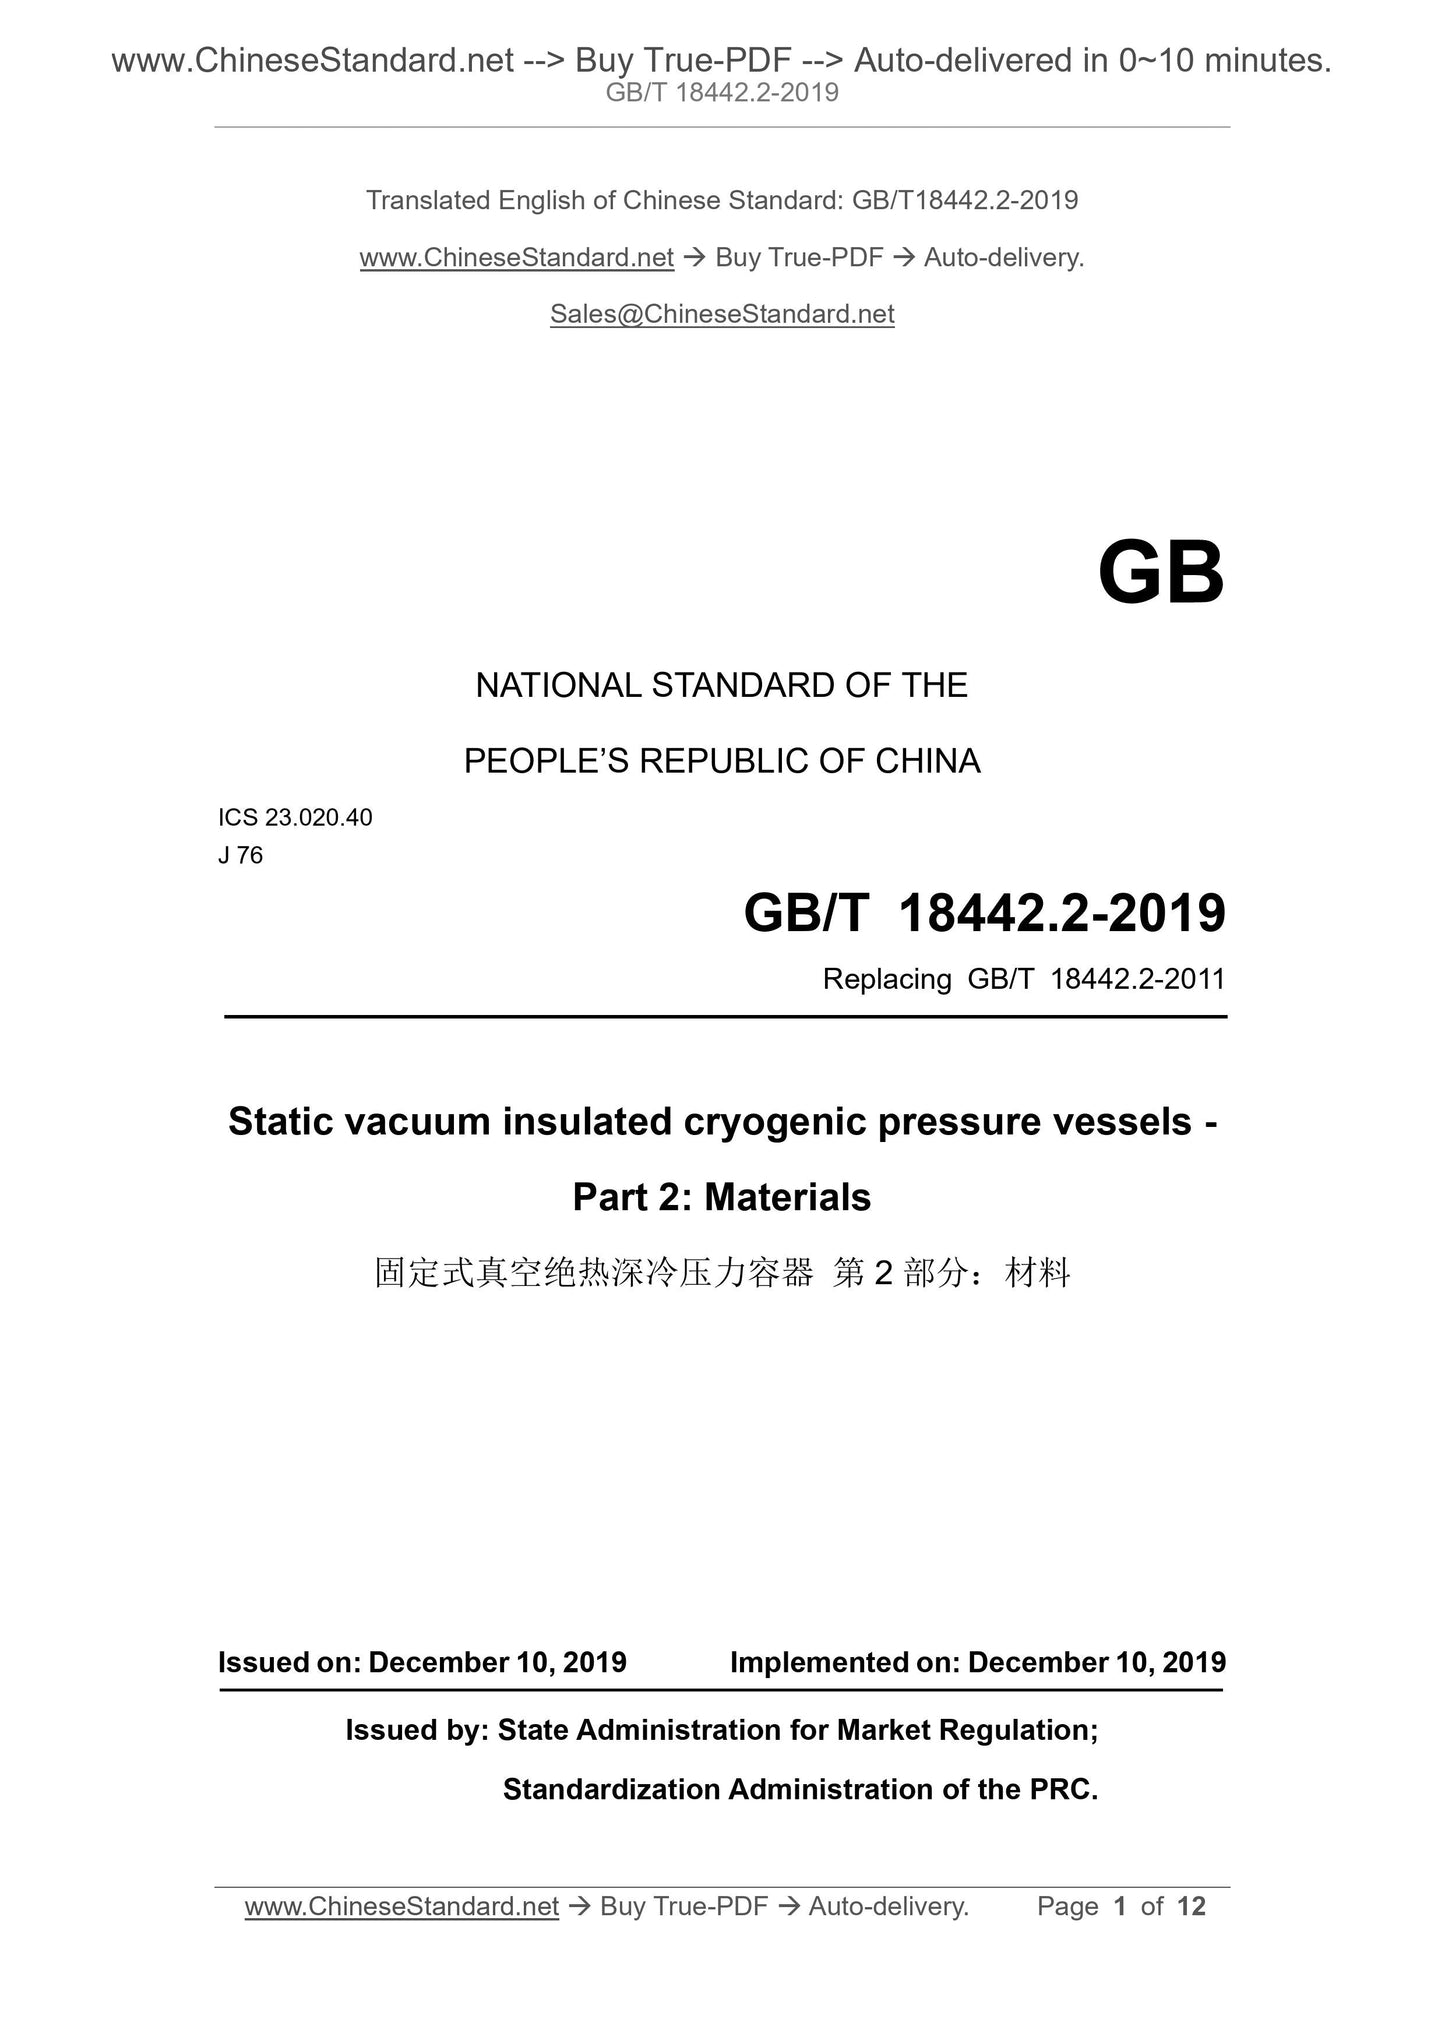 GB/T 18442.2-2019 Page 1